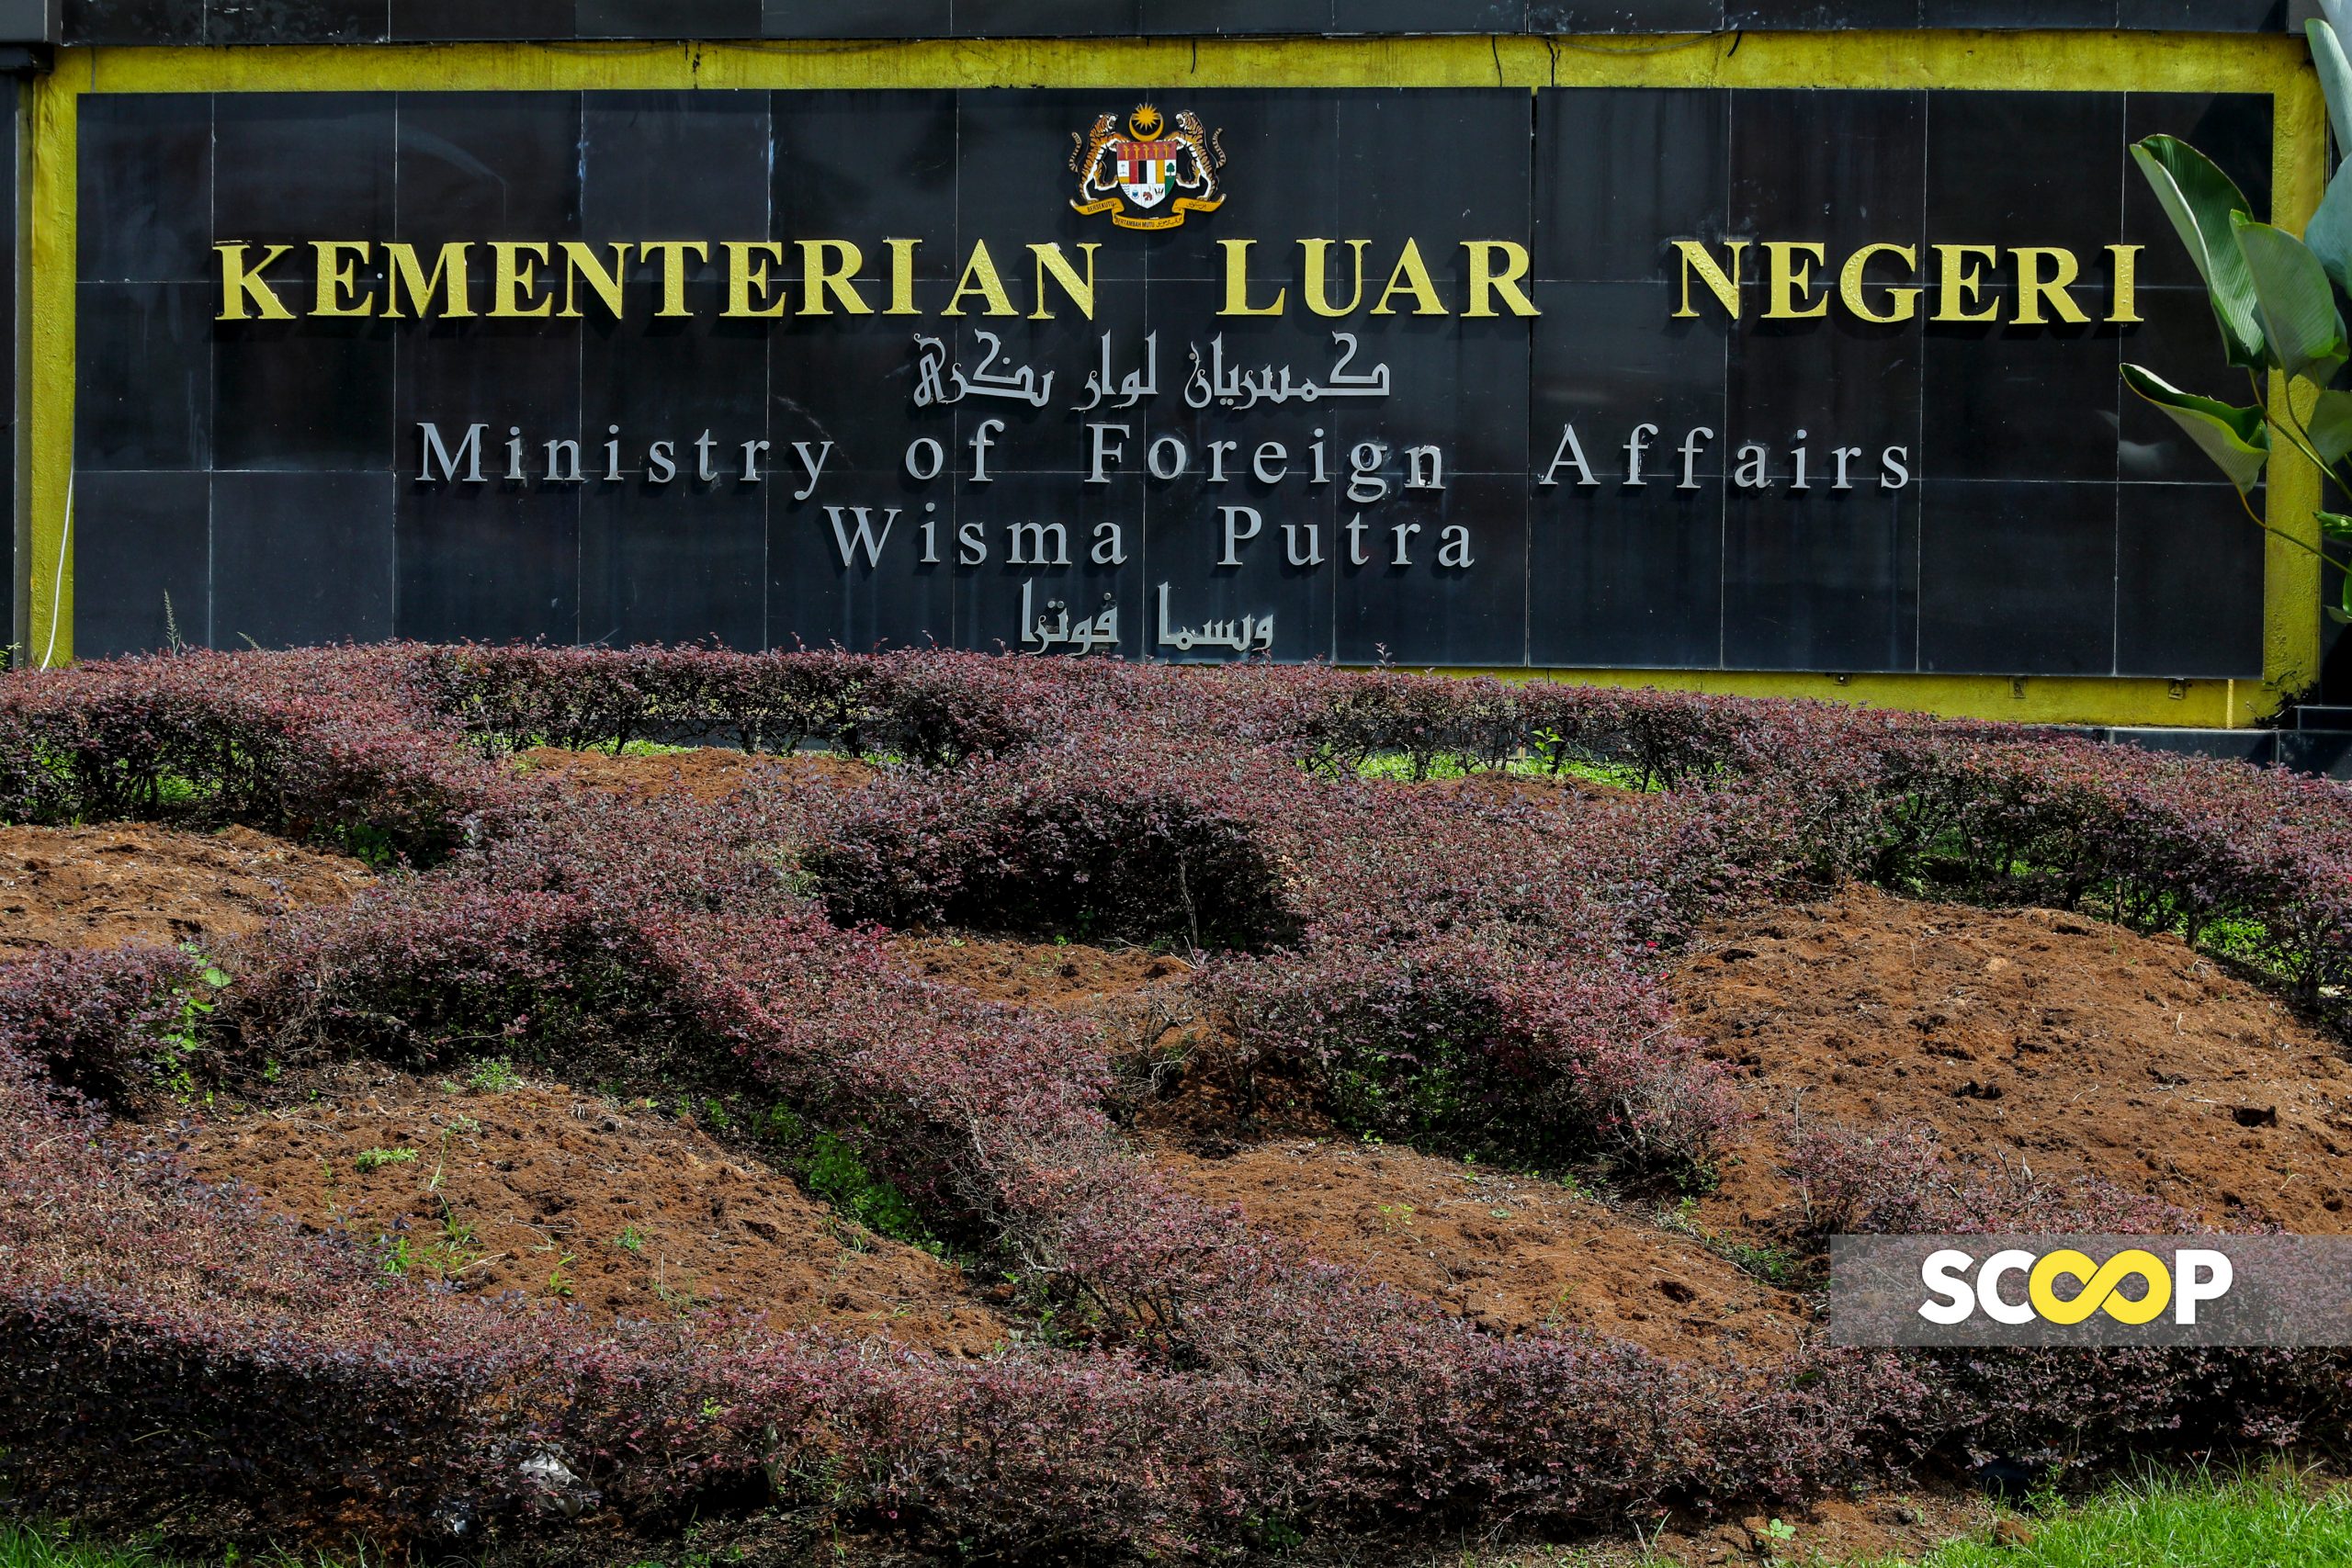 [UPDATED] Five Malaysians in West Bank safe: Wisma Putra